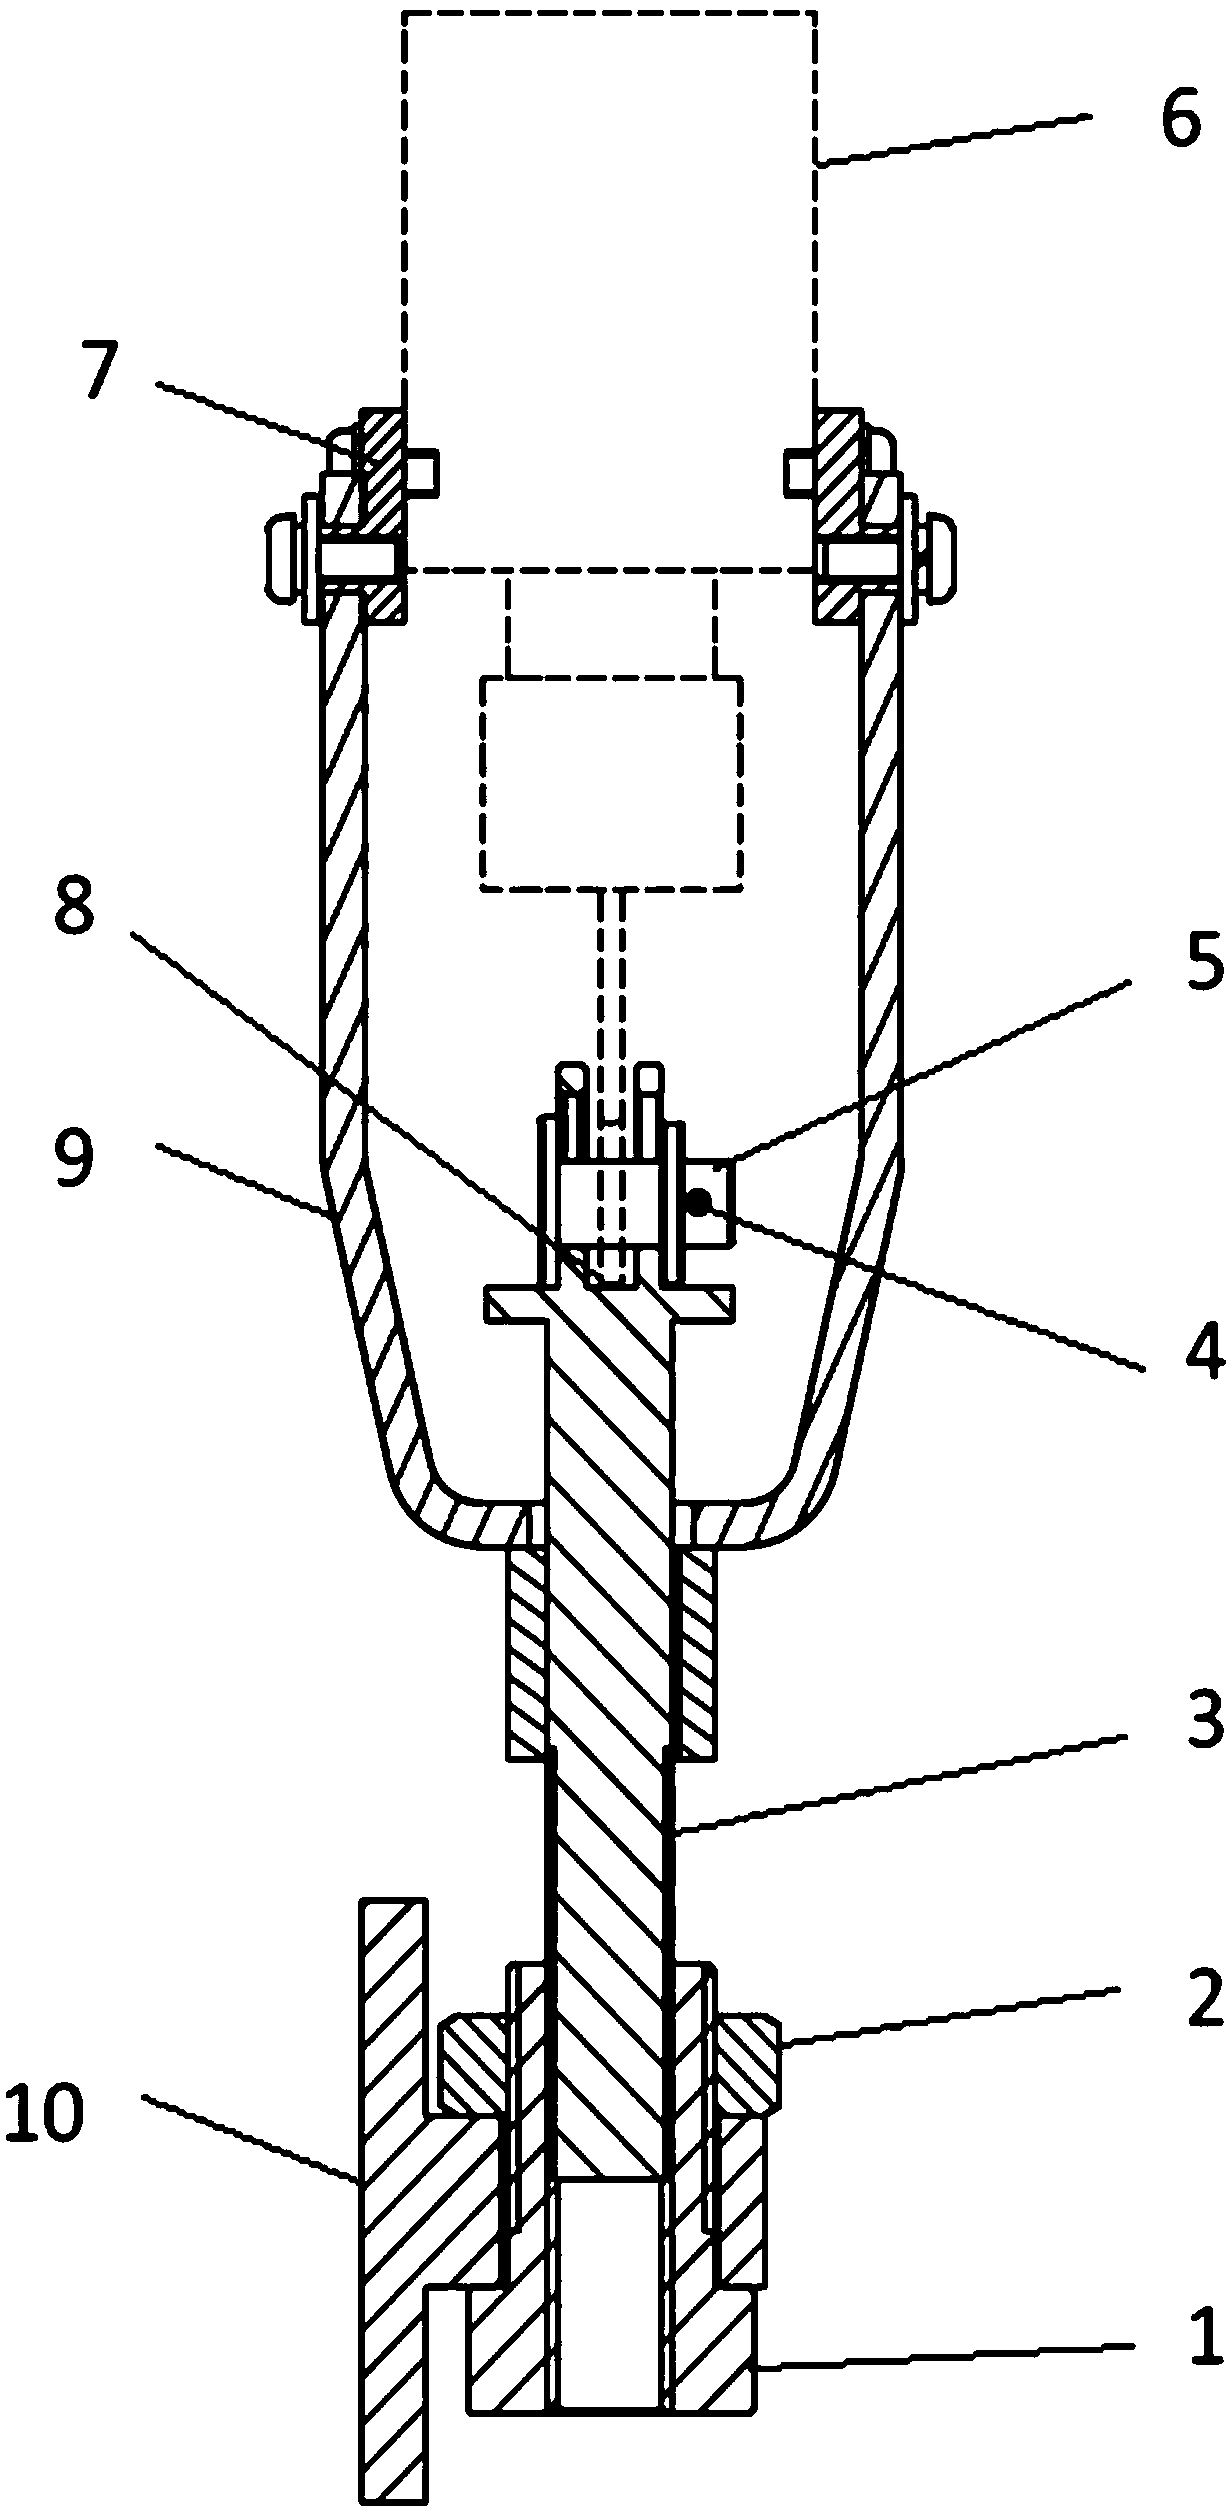 A passive pull-off mechanism for a shedding plug